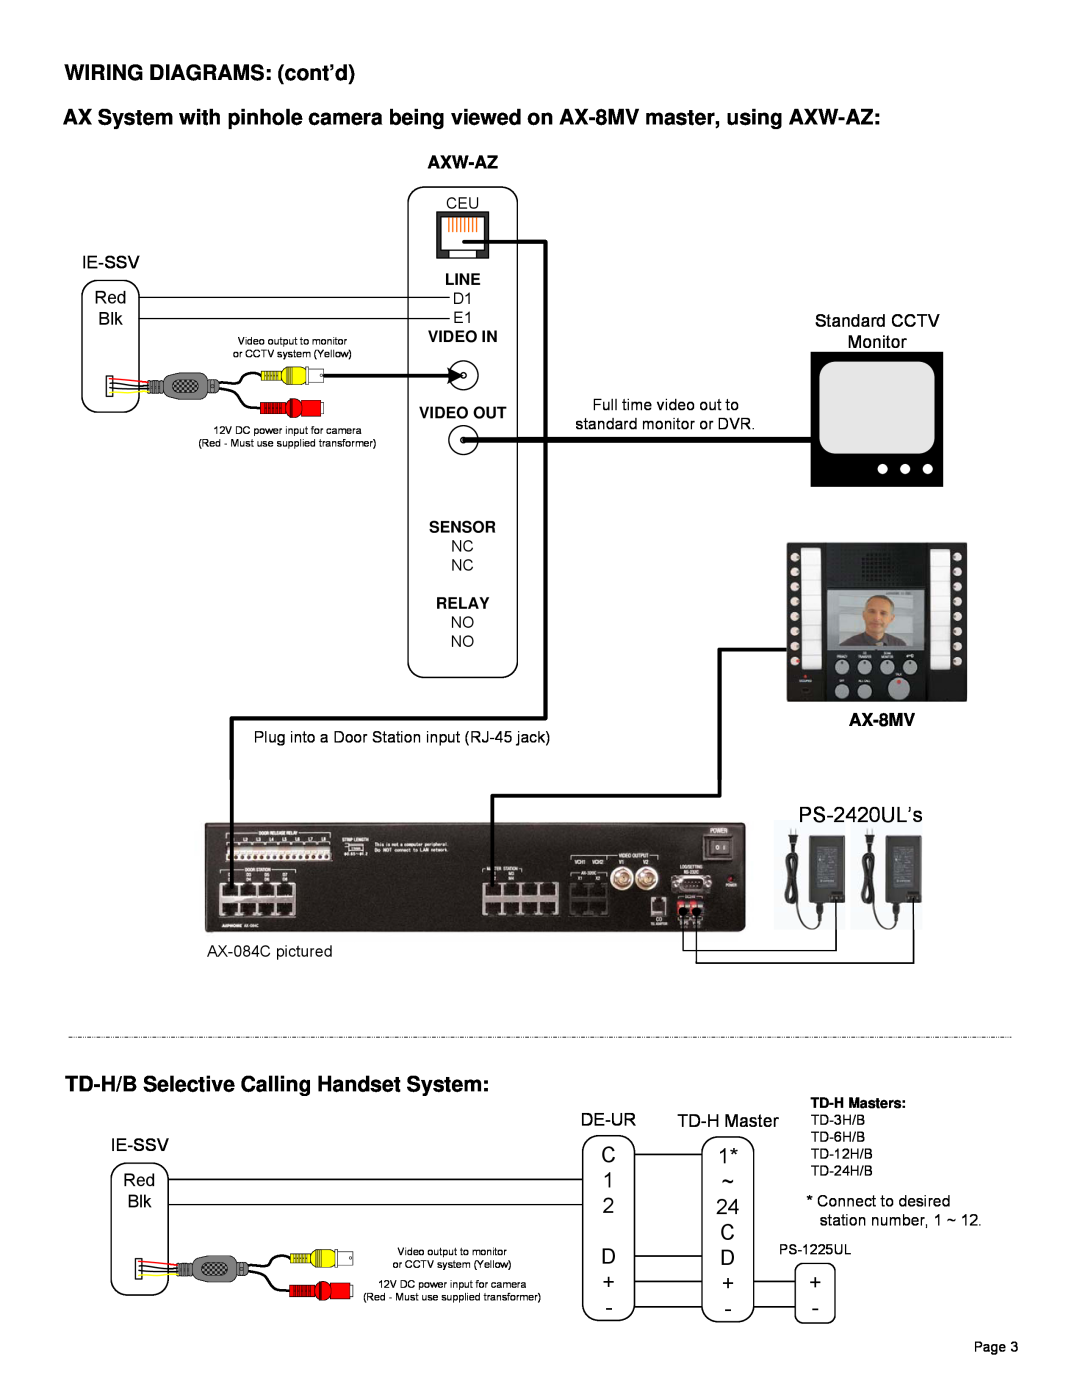 Aiphone ie-ssv manual WIRING DIAGRAMS cont’d, TD-H/BSelective Calling Handset System 